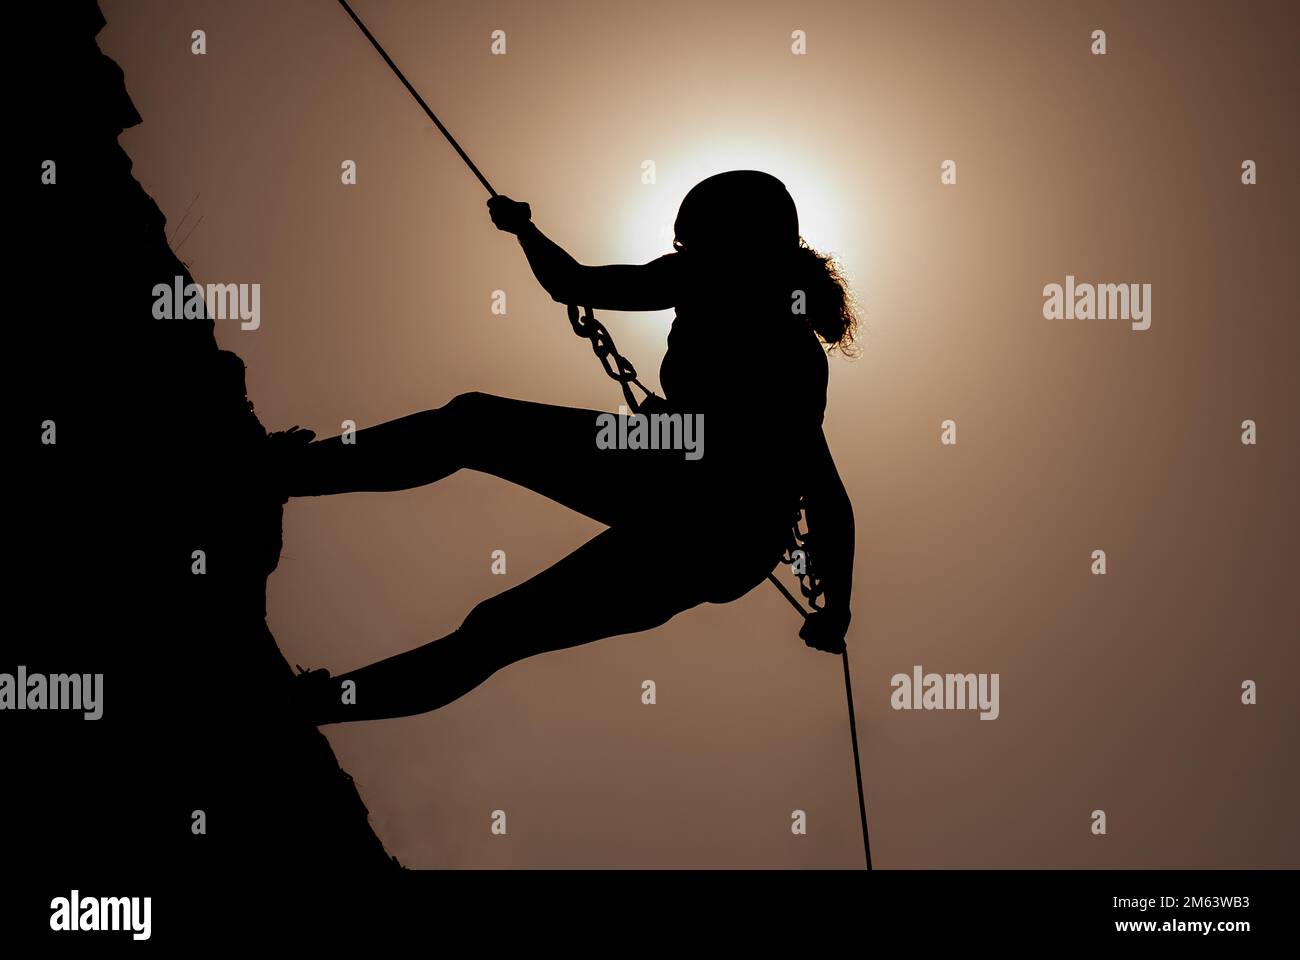 Silhouette of successful young female climber in the mountains Concept of self-improvement, motivation, movement inspiration, motivational goals. Stock Photo